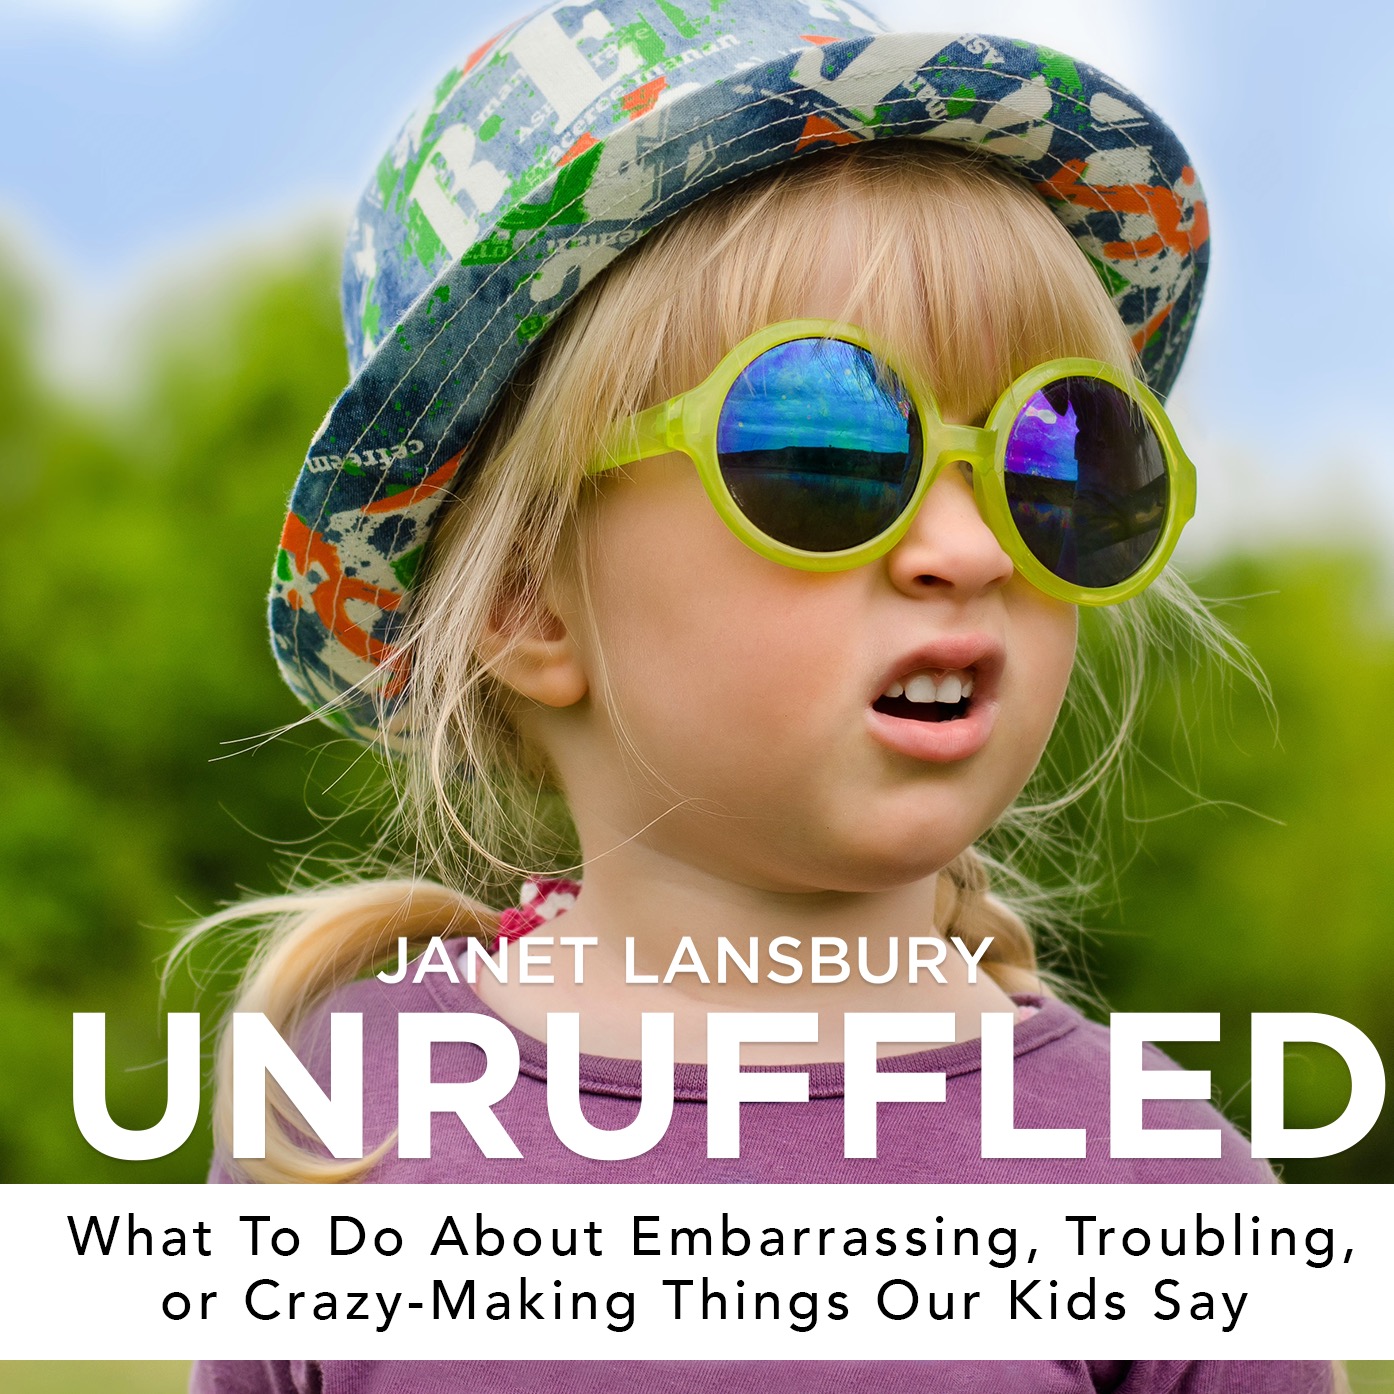 What To Do About Embarrassing, Troubling, or Crazy-Making Things Our Kids Say